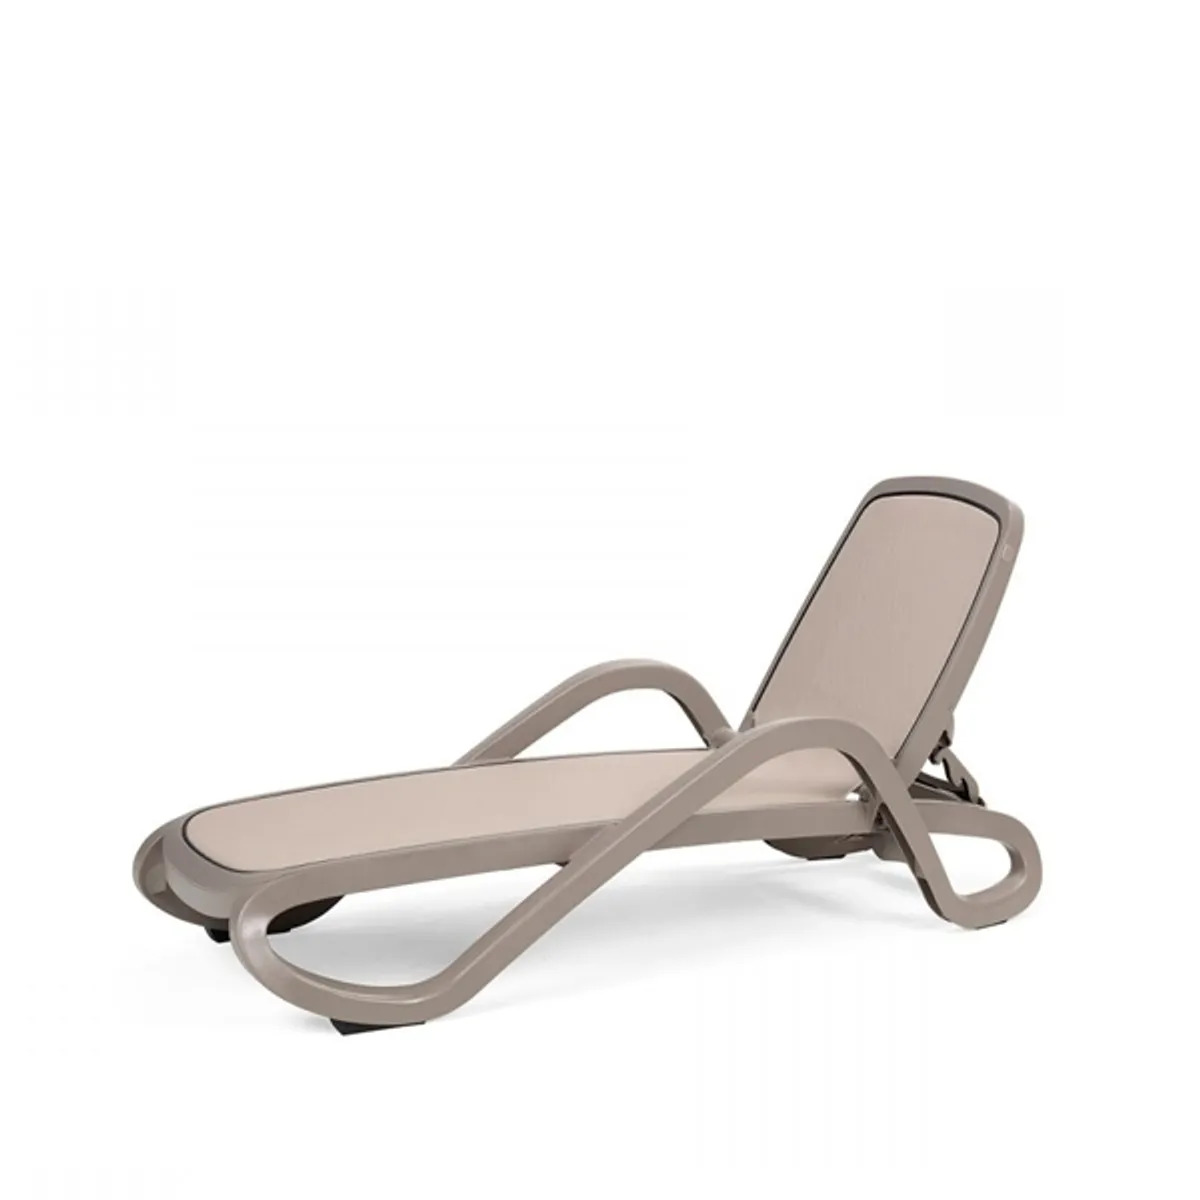 Alfa lounger with arms Inside Out Contracts5